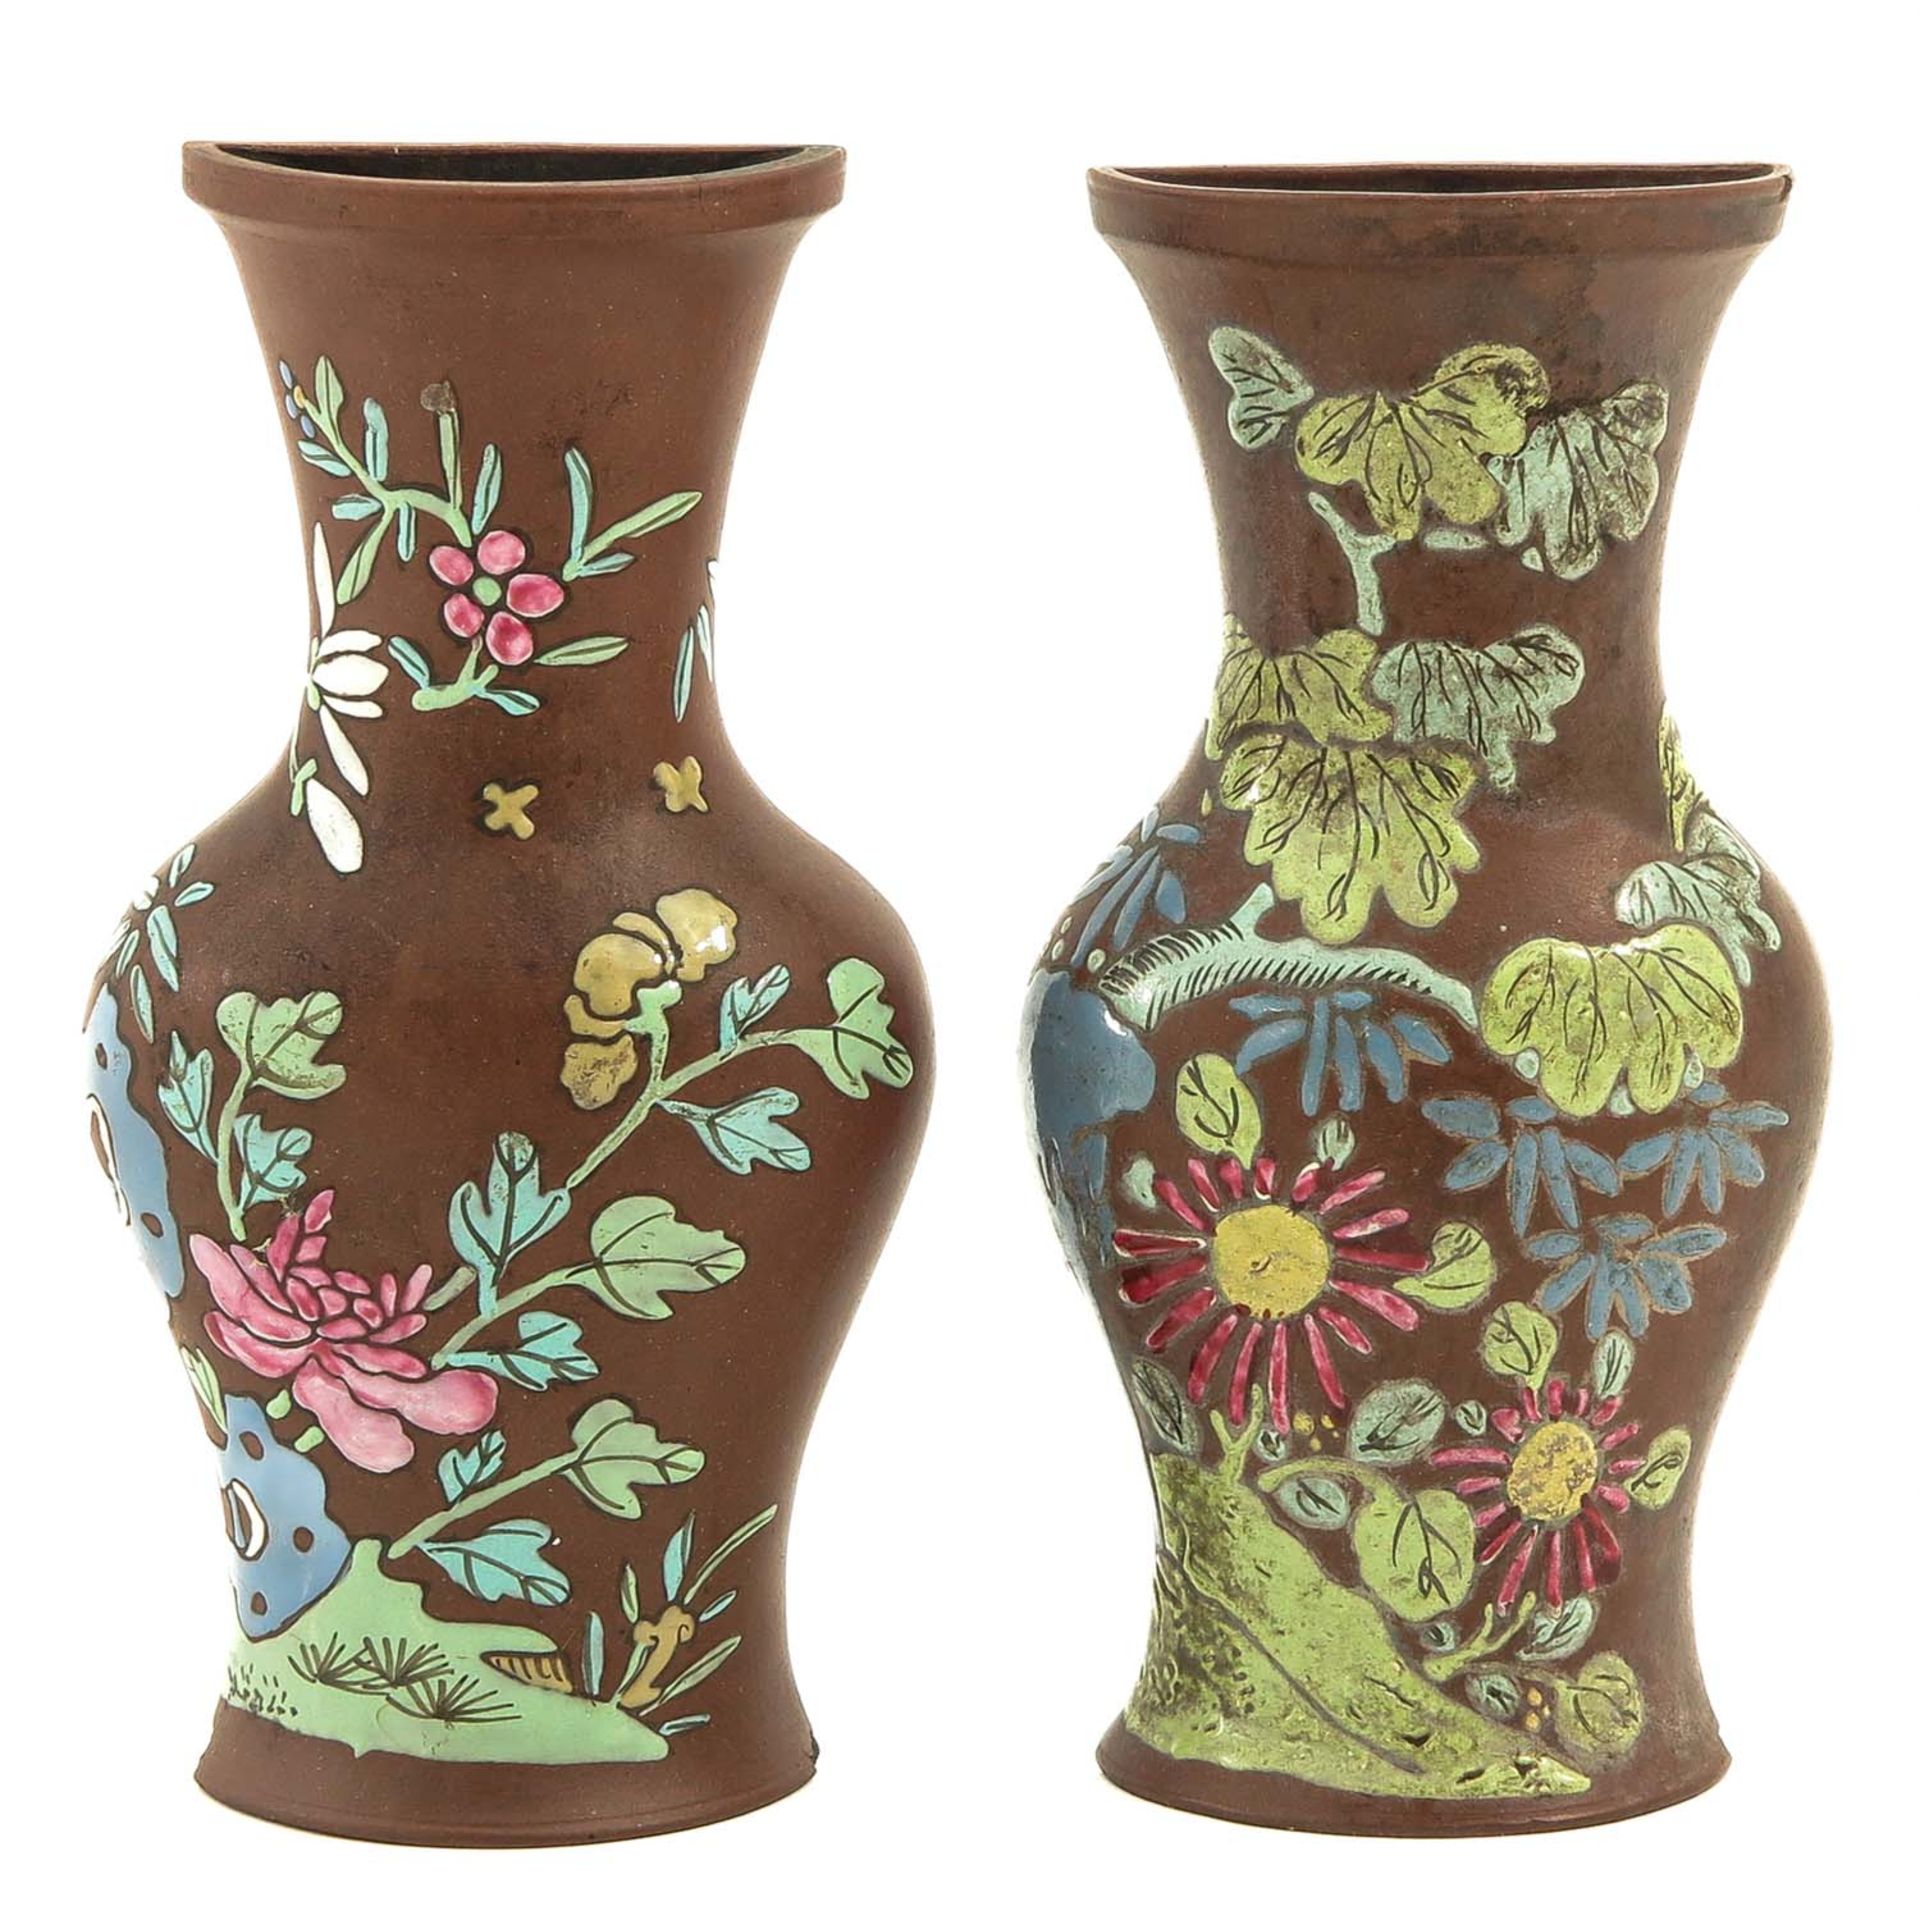 A Pair of Yixing Wall Vases